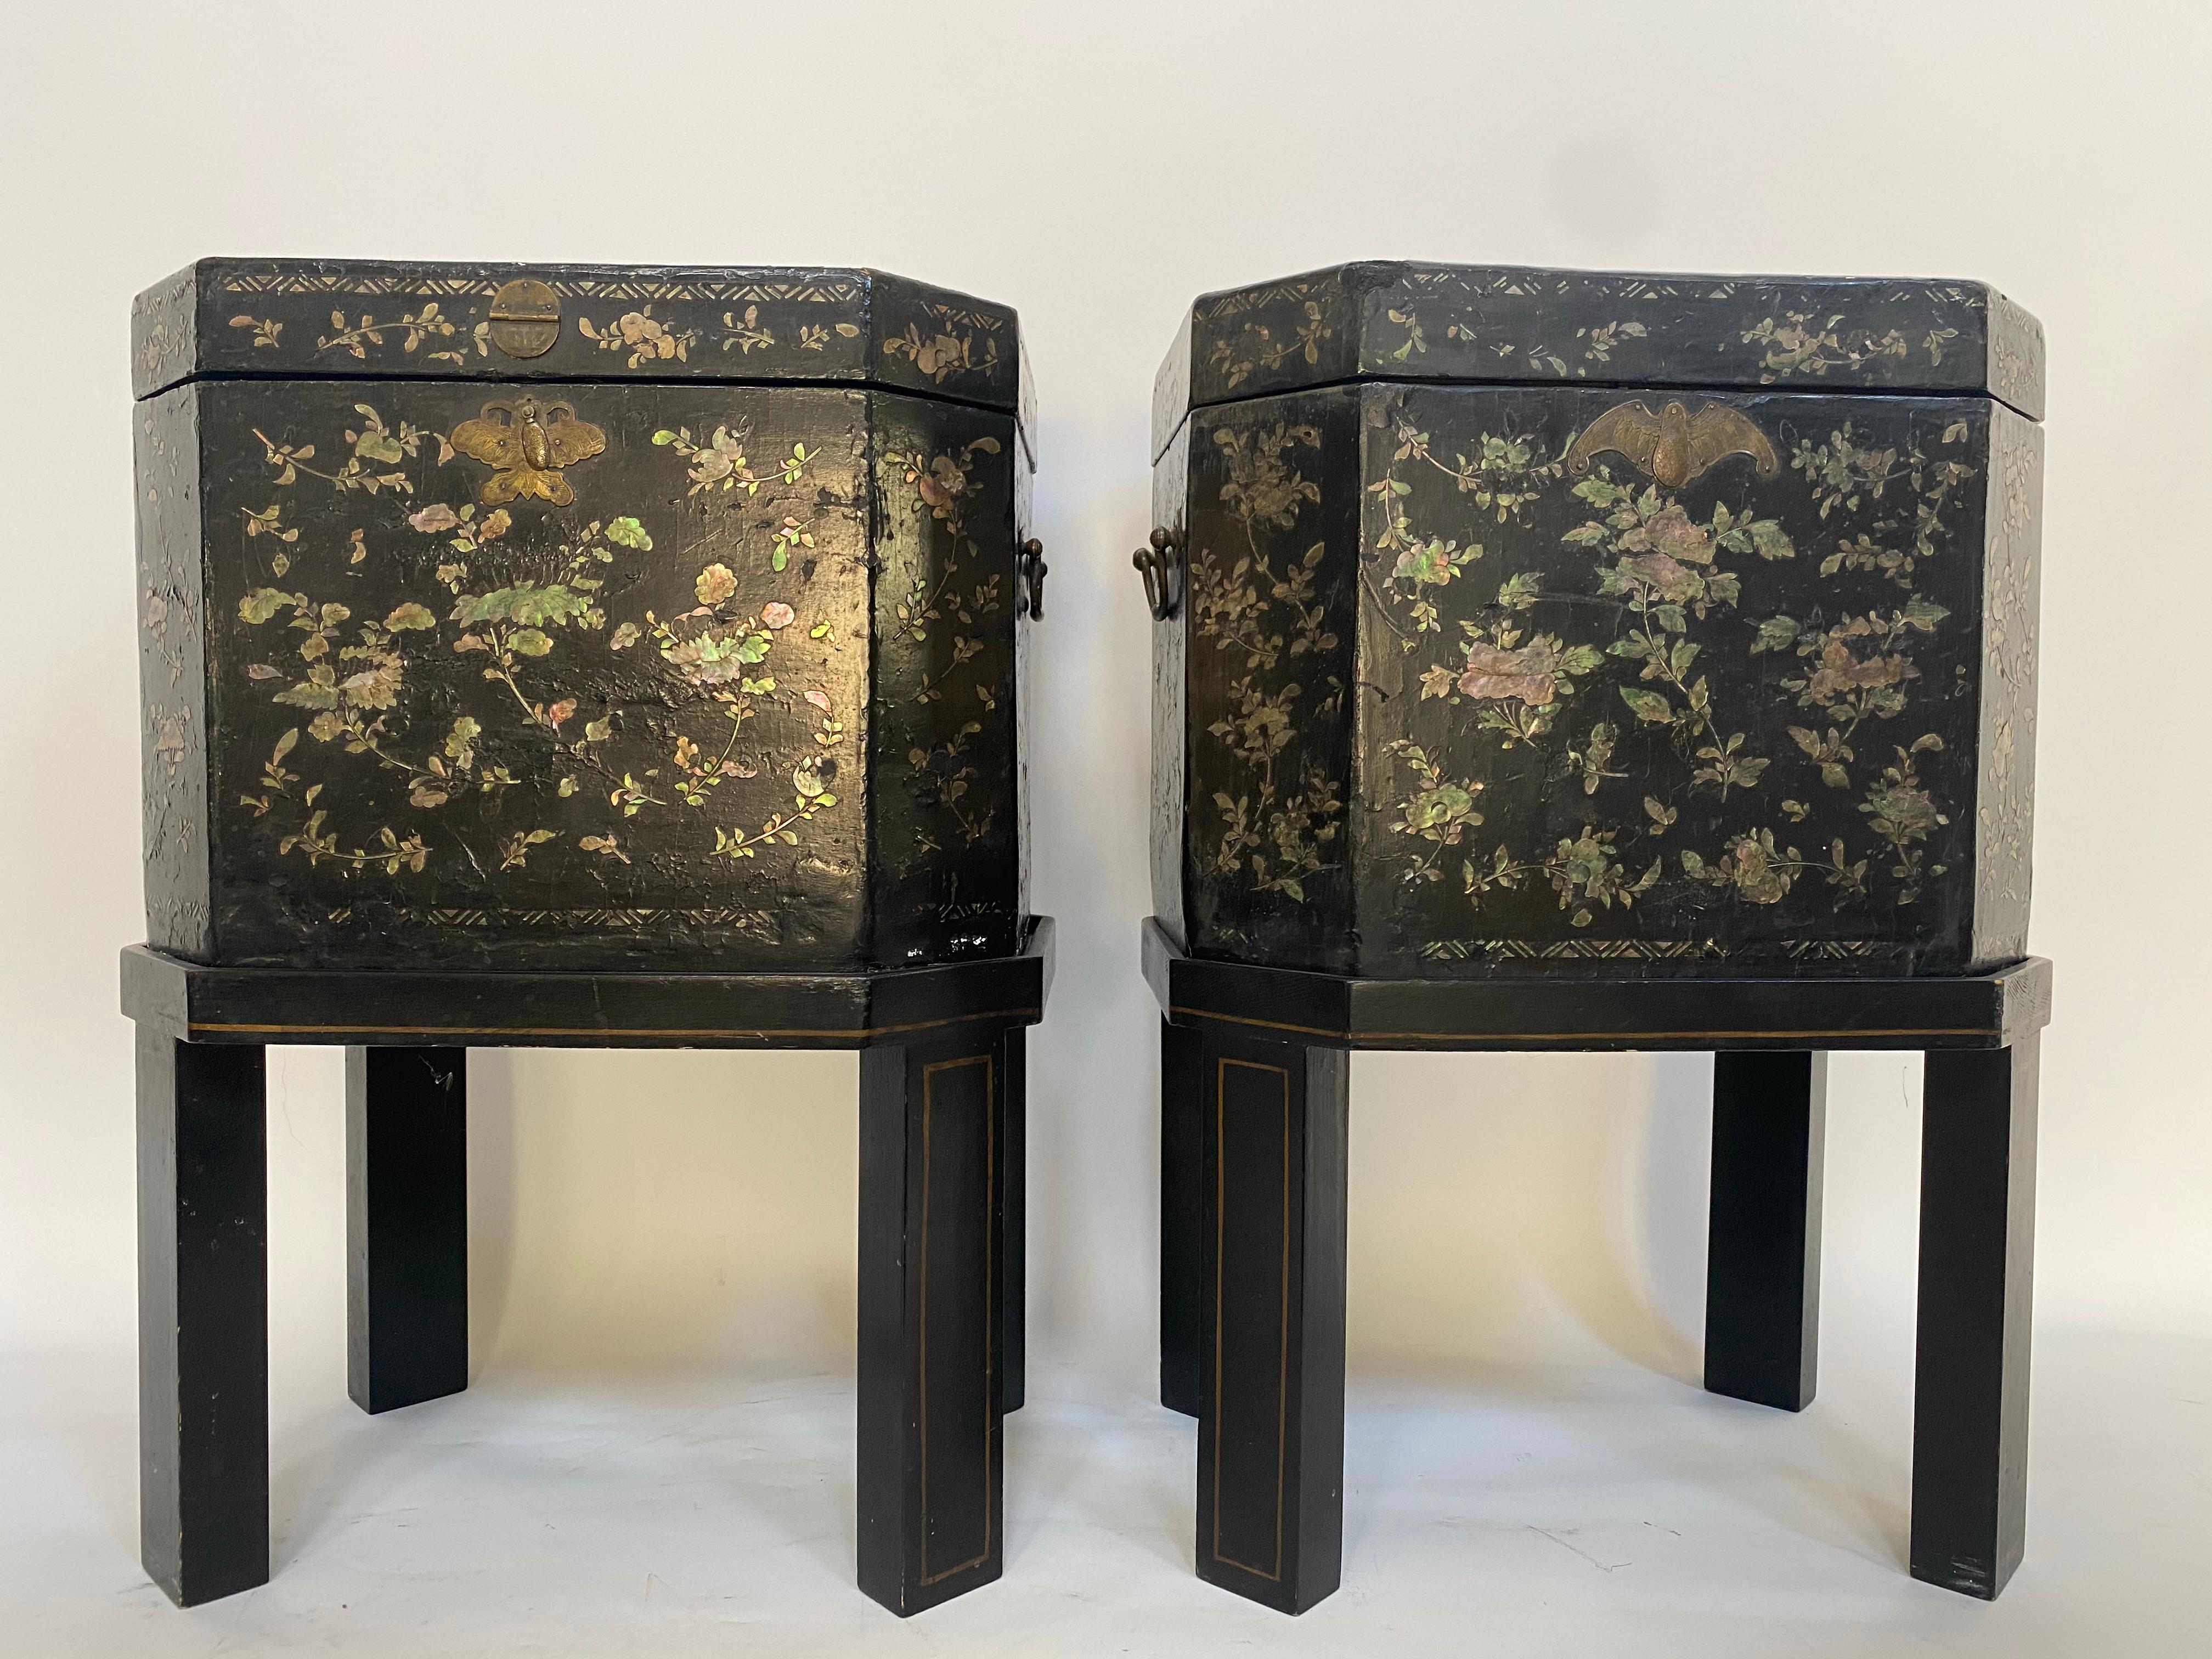 19th century unique pair of shell Inlaid black lacquer big Chinese tea caddies with Bail handles two sides ,each with hinged lid reversing to a mother-of-pearl inlaid decoration and enclosing a fitted pewter canister with double lid, set on a stand,